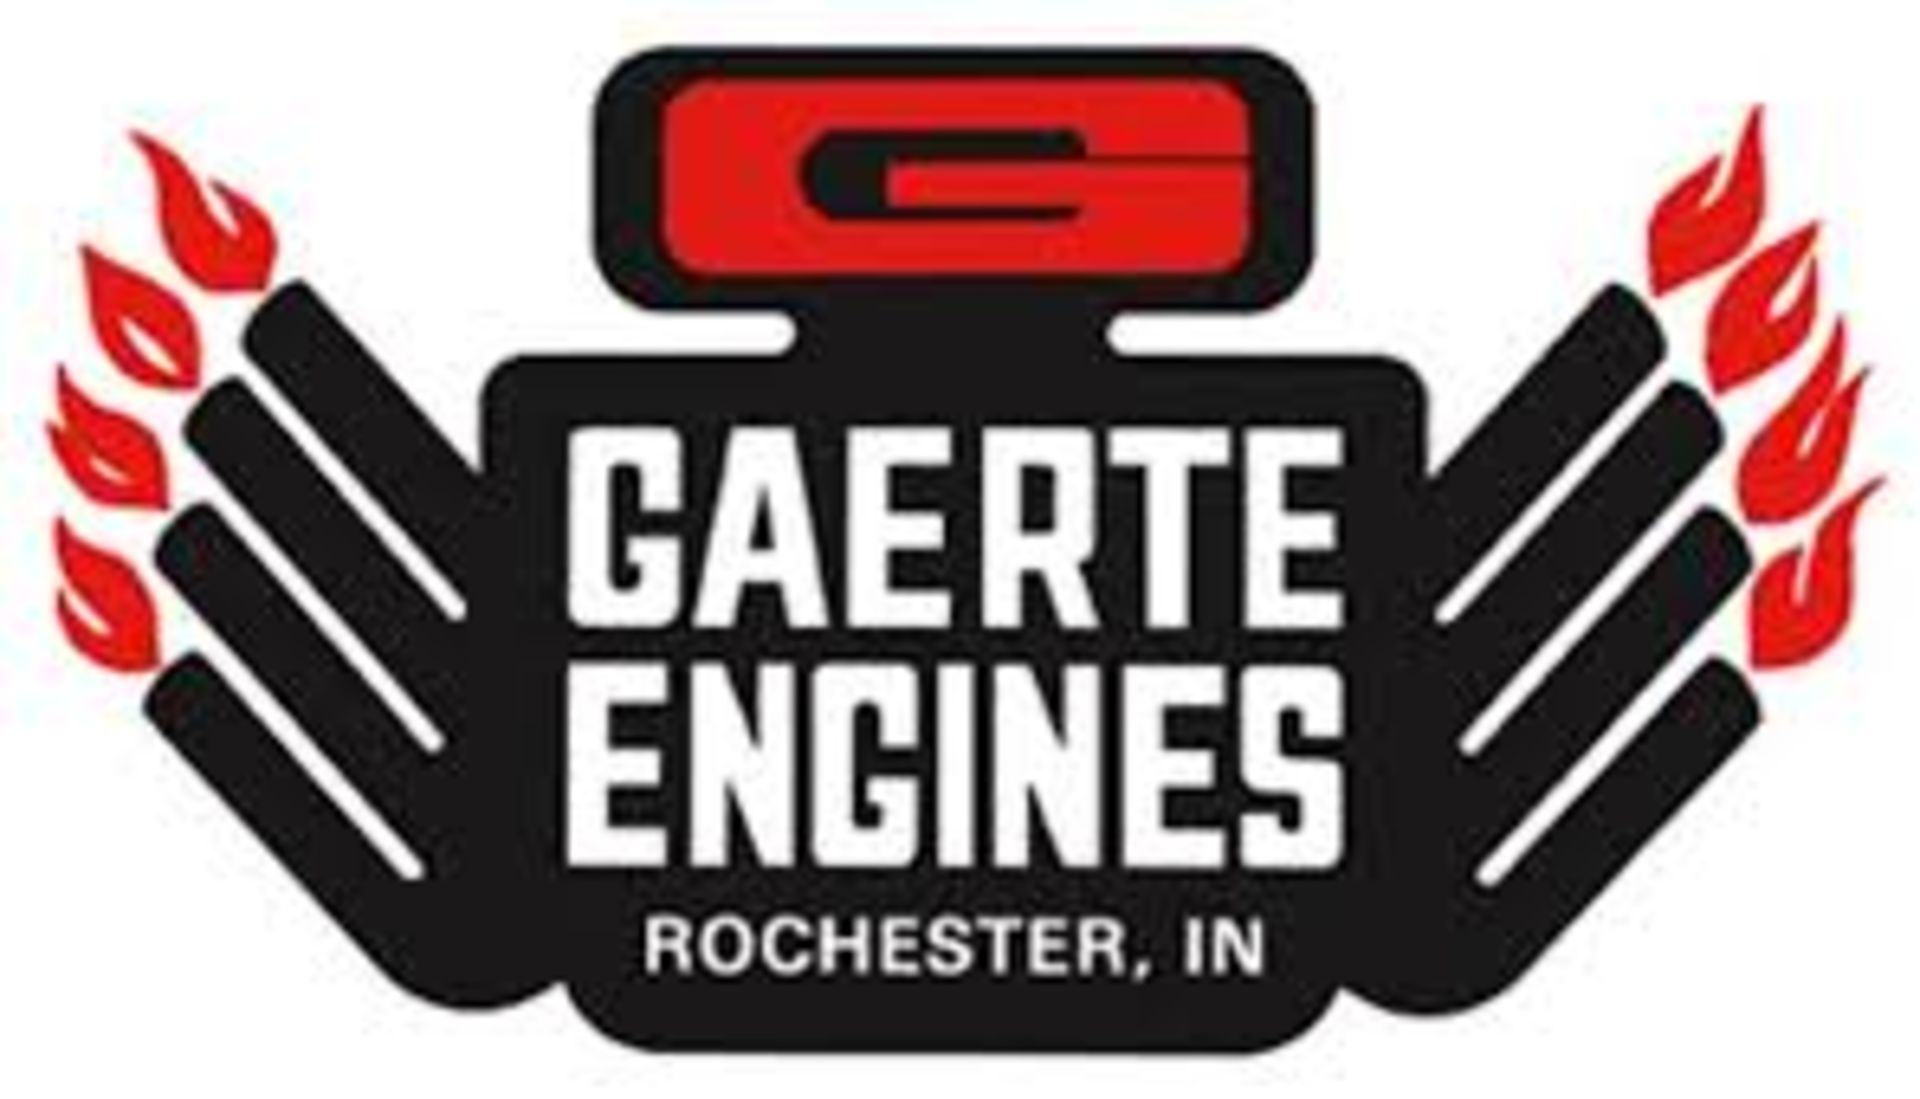 Intellectual Property of Gaerte Engines